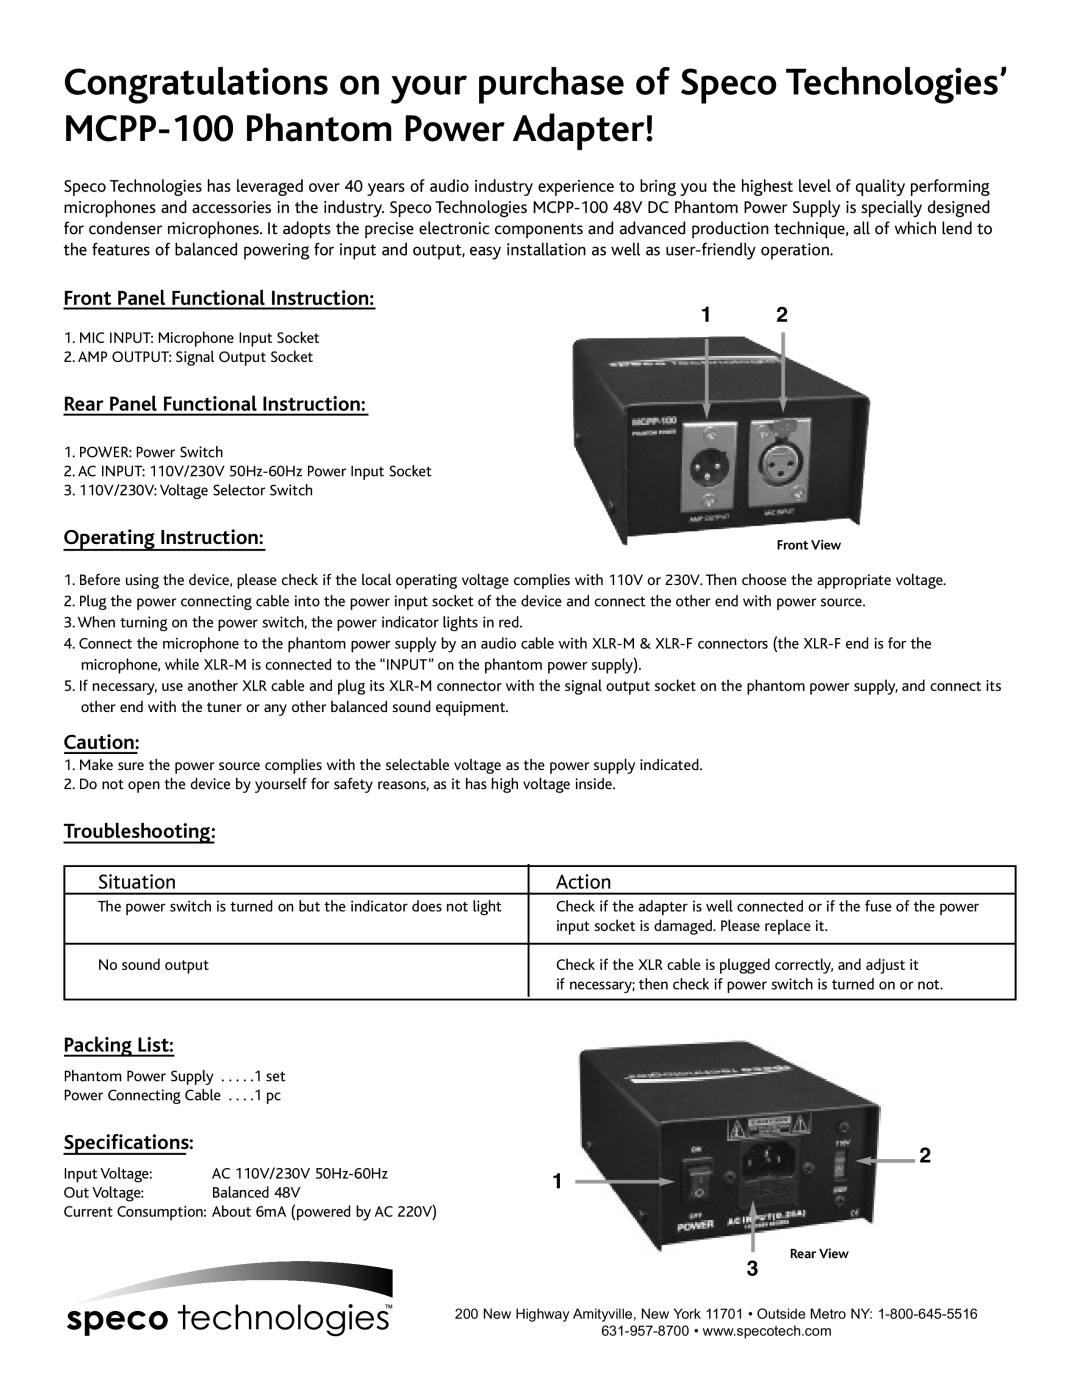 Speco Technologies MCPP-100 specifications Front Panel Functional Instruction, Rear Panel Functional Instruction, Action 